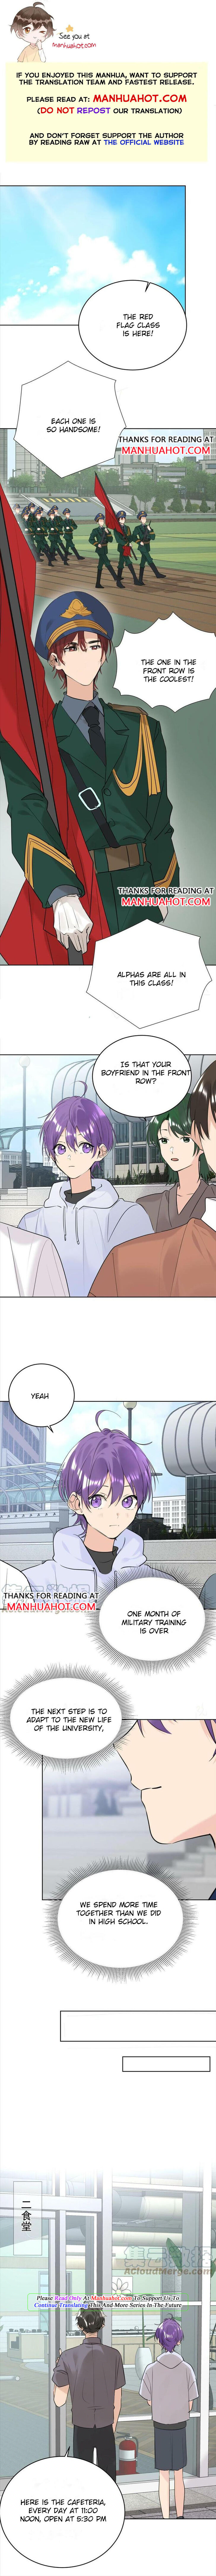 Did the Nerd Manage to Flirt With the Cutie Today? Ch.080